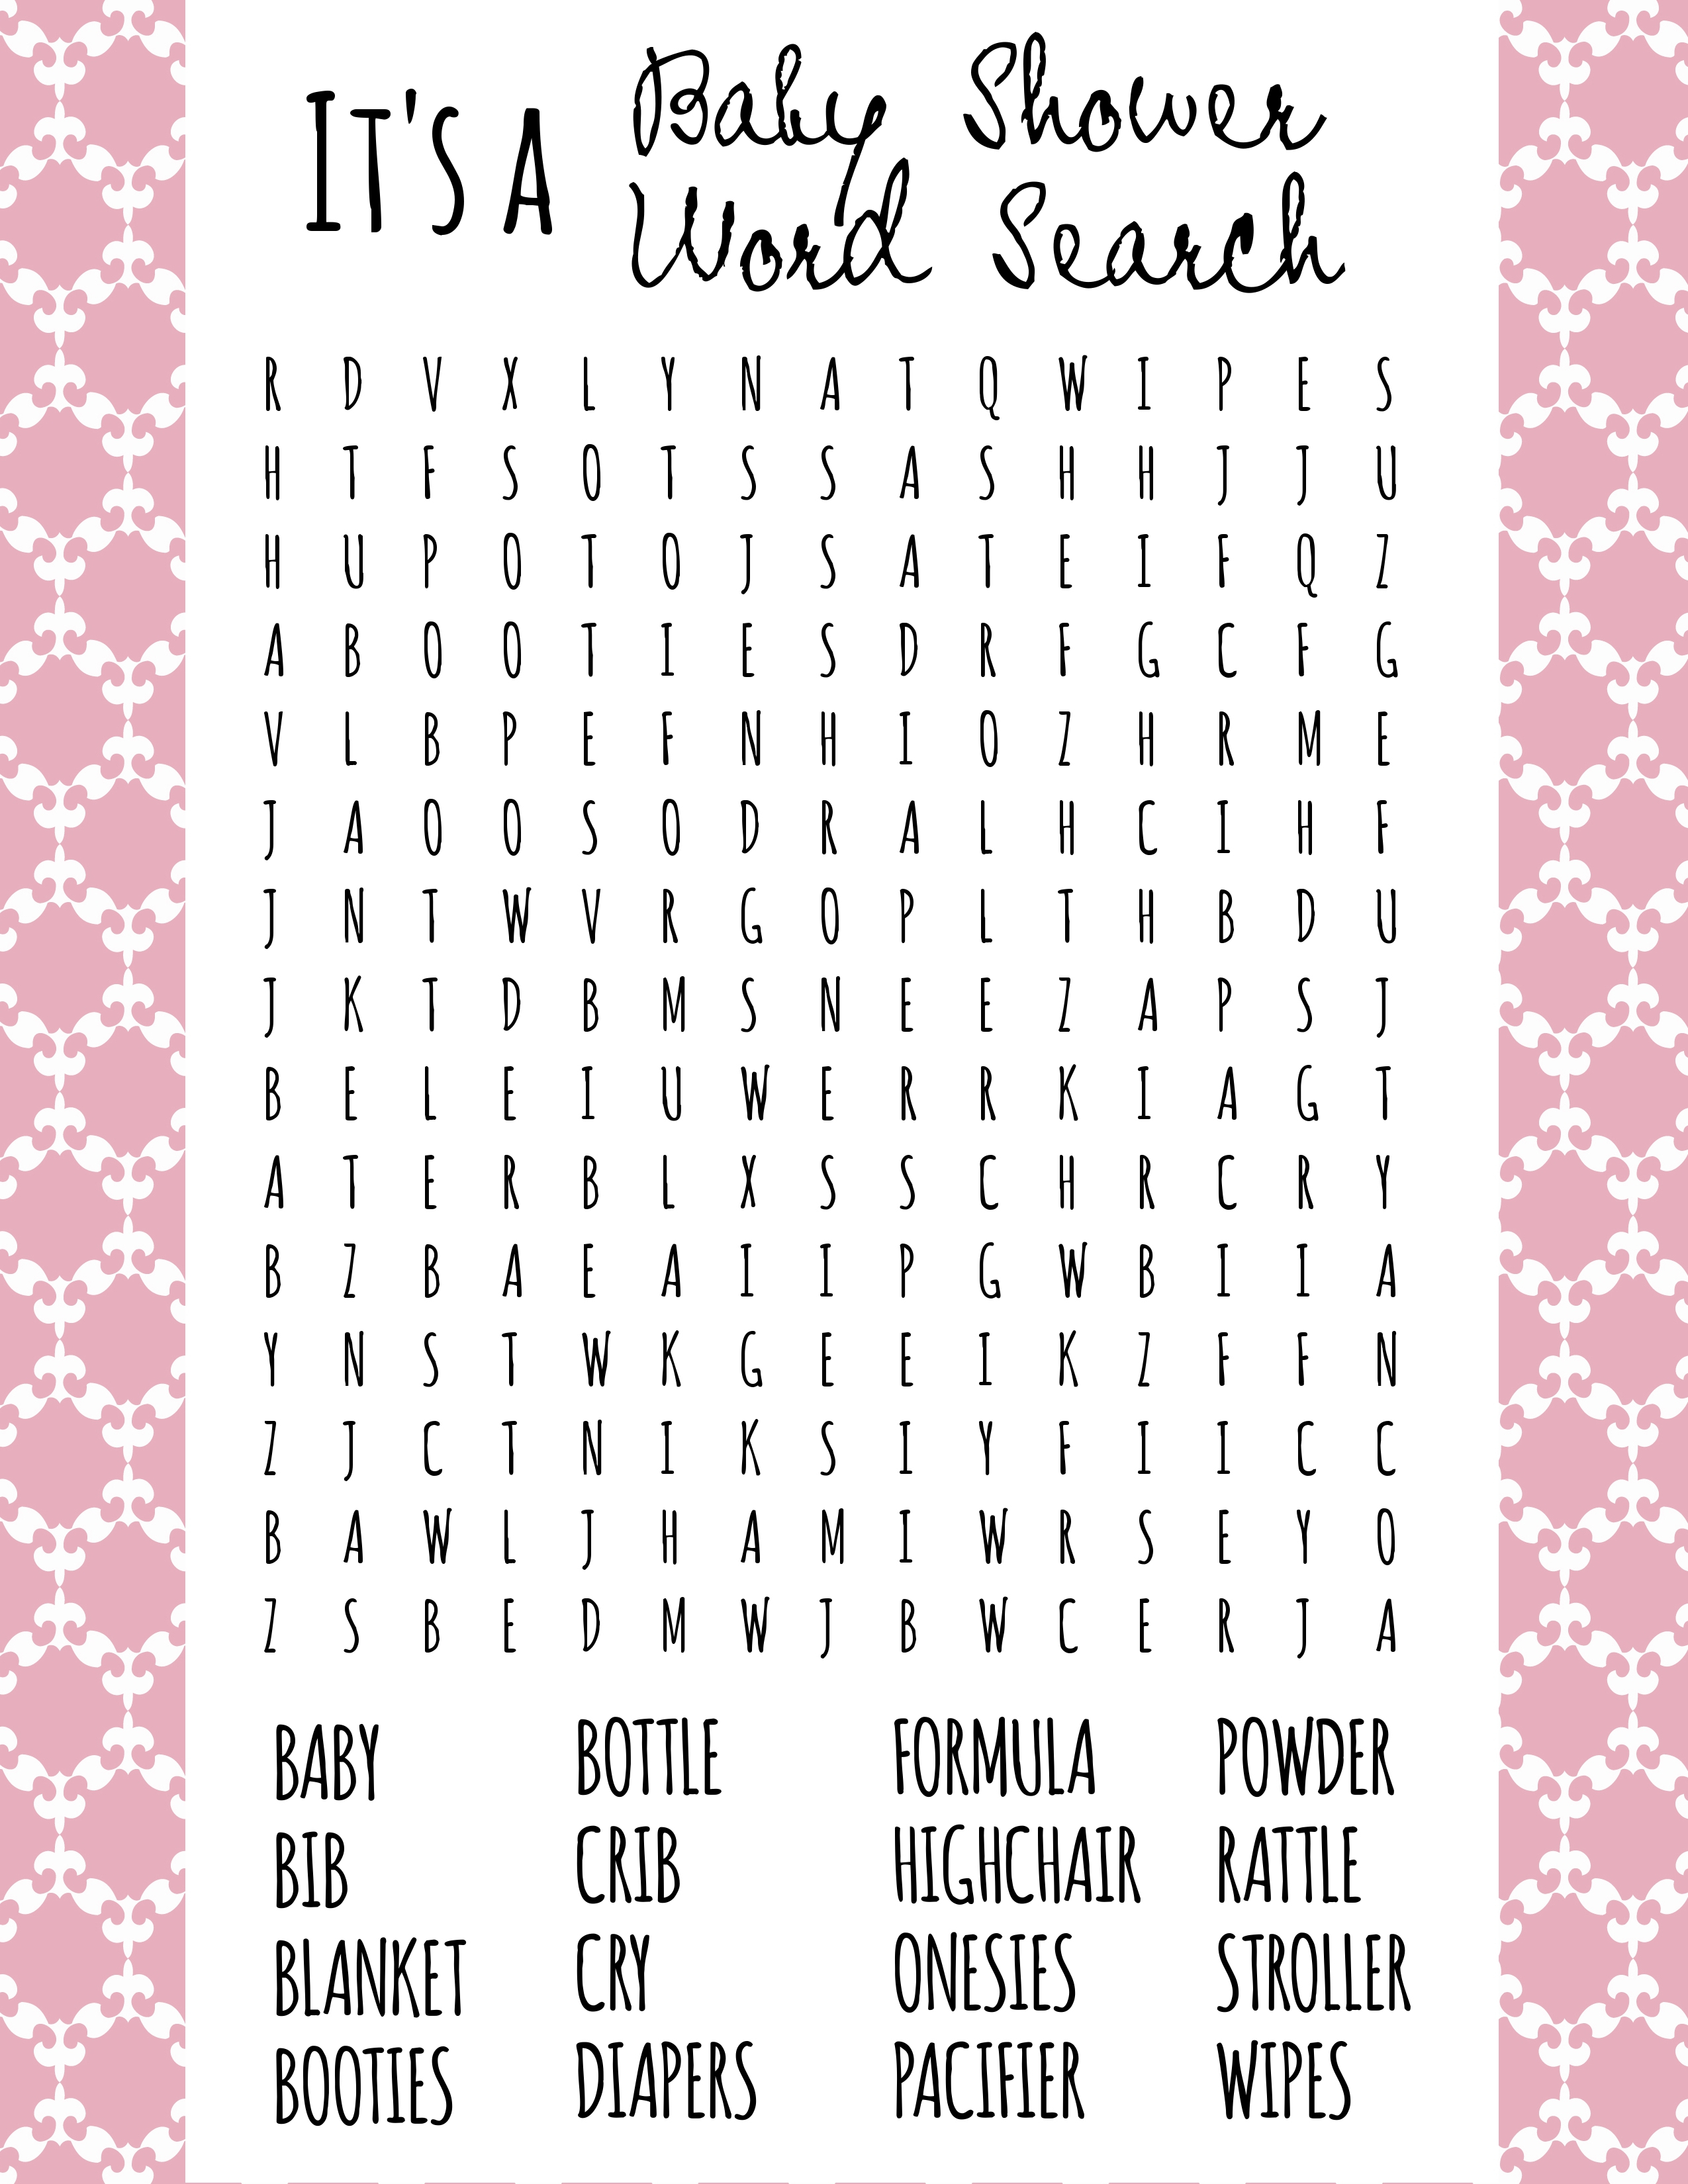 Baby Shower Word Search - Frugal Fanatic - Free Word Scramble Maker Printable